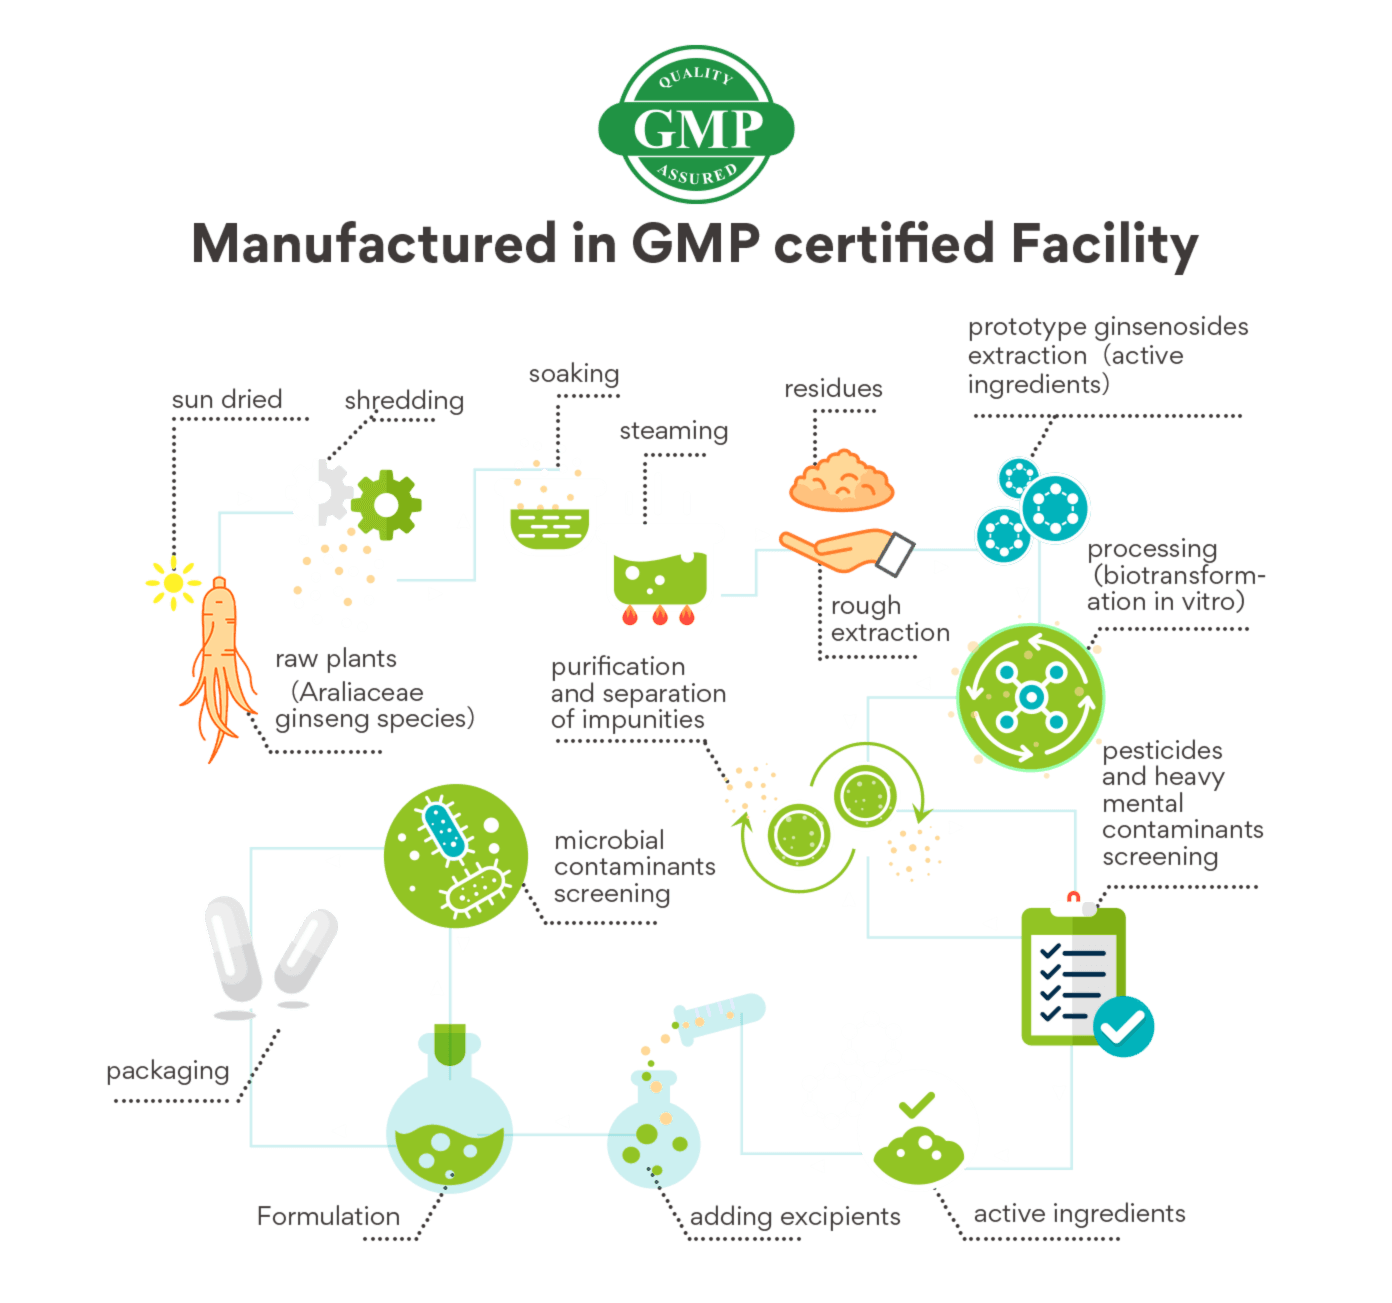 Manufactured in GMP certified Facility